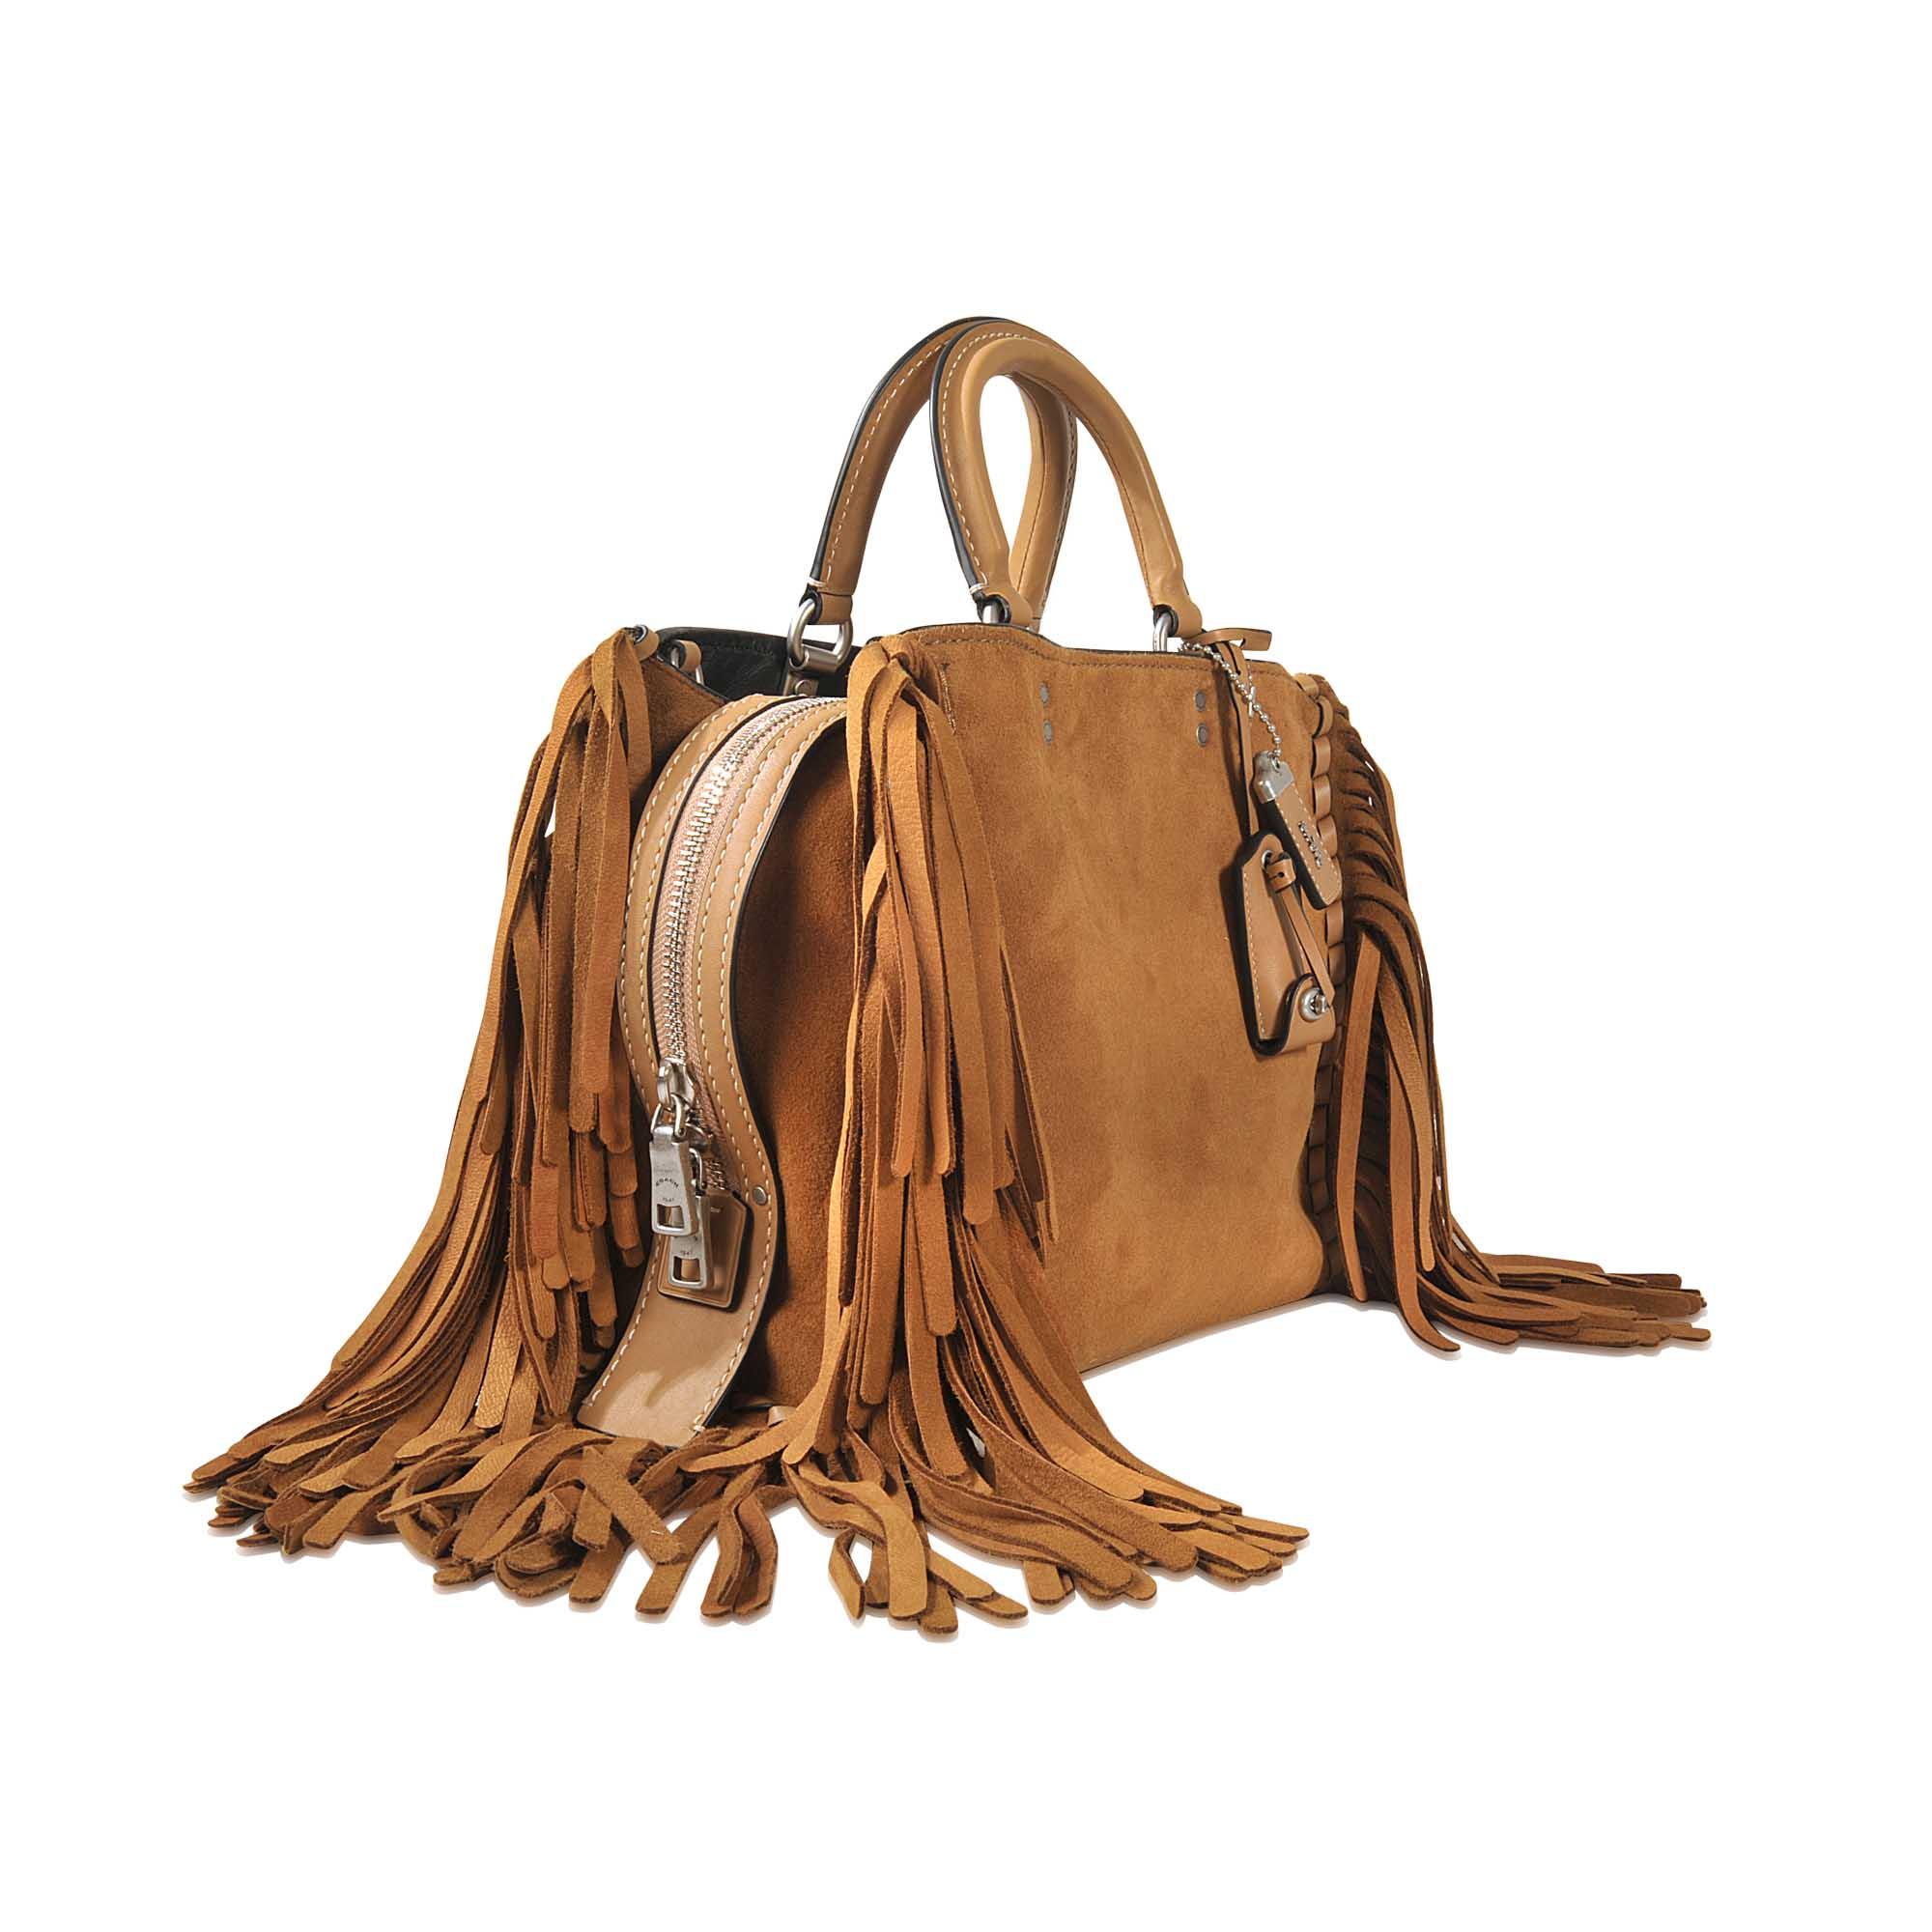 COACH Suede Fringe Rogue Bag in Brown - Lyst